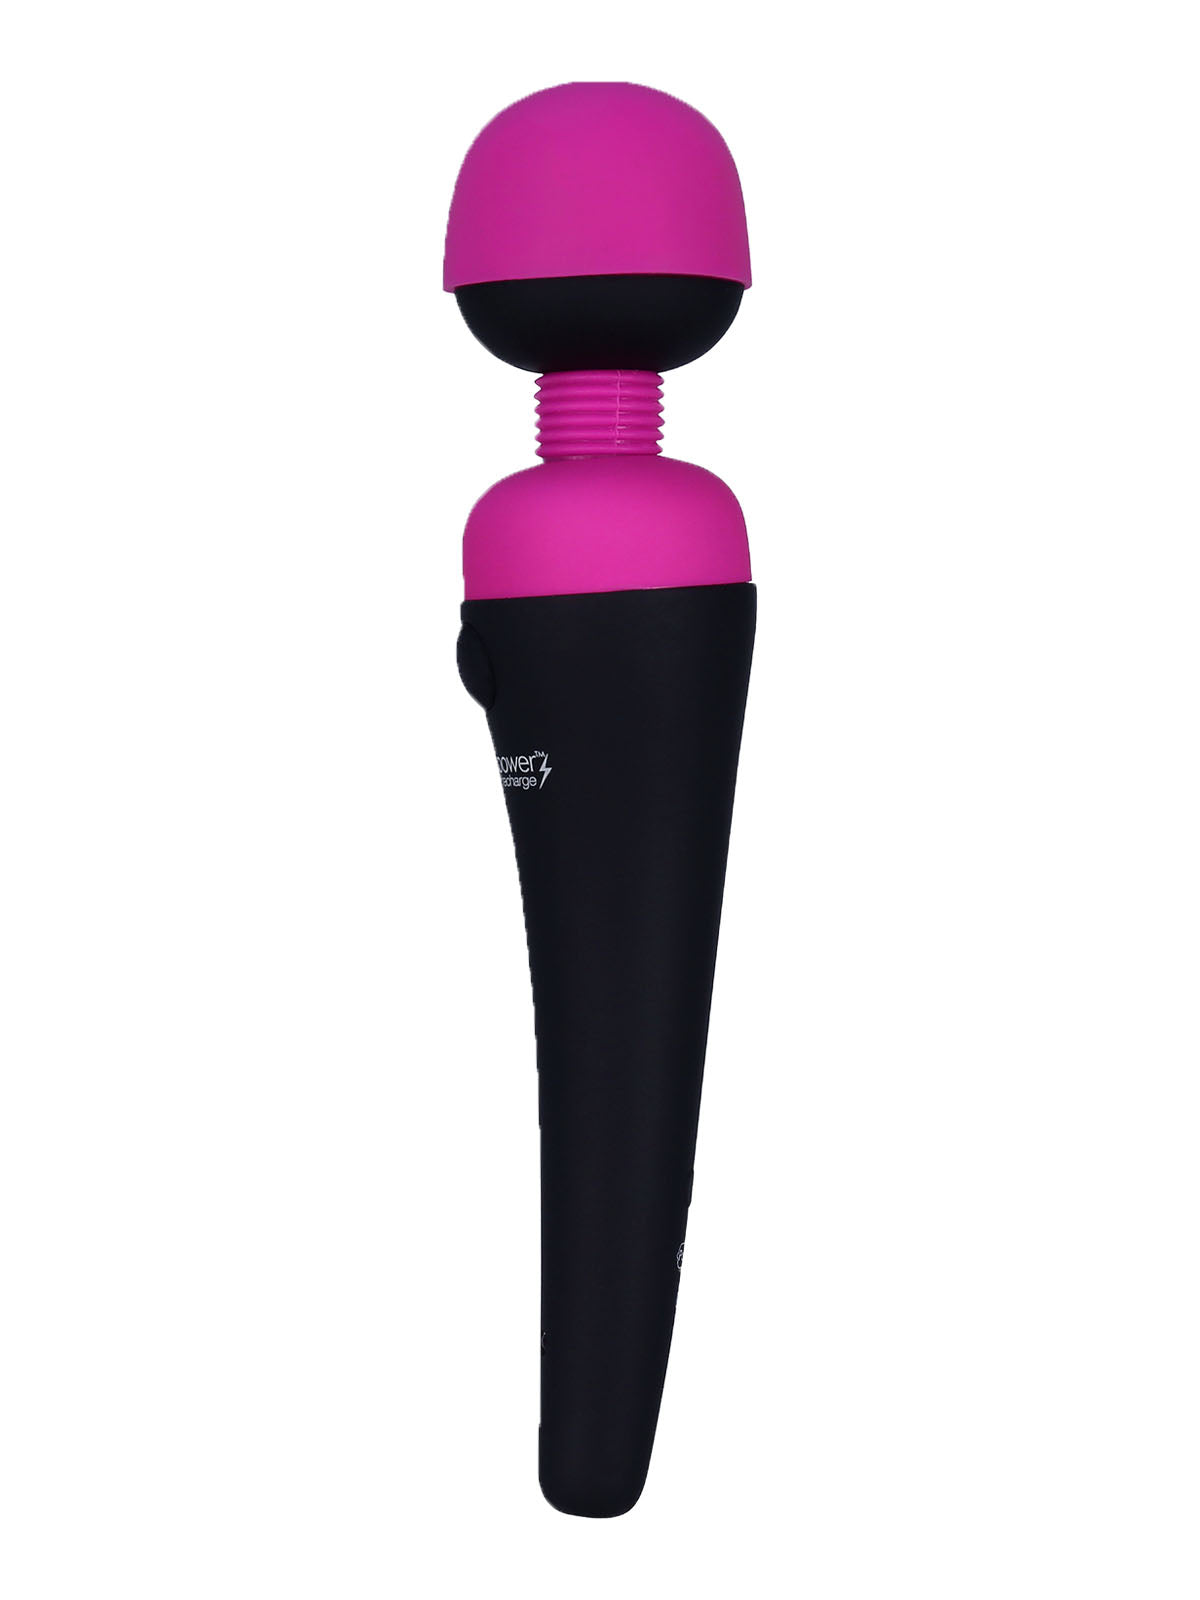 PalmPower | Rechargeable Personal Massager